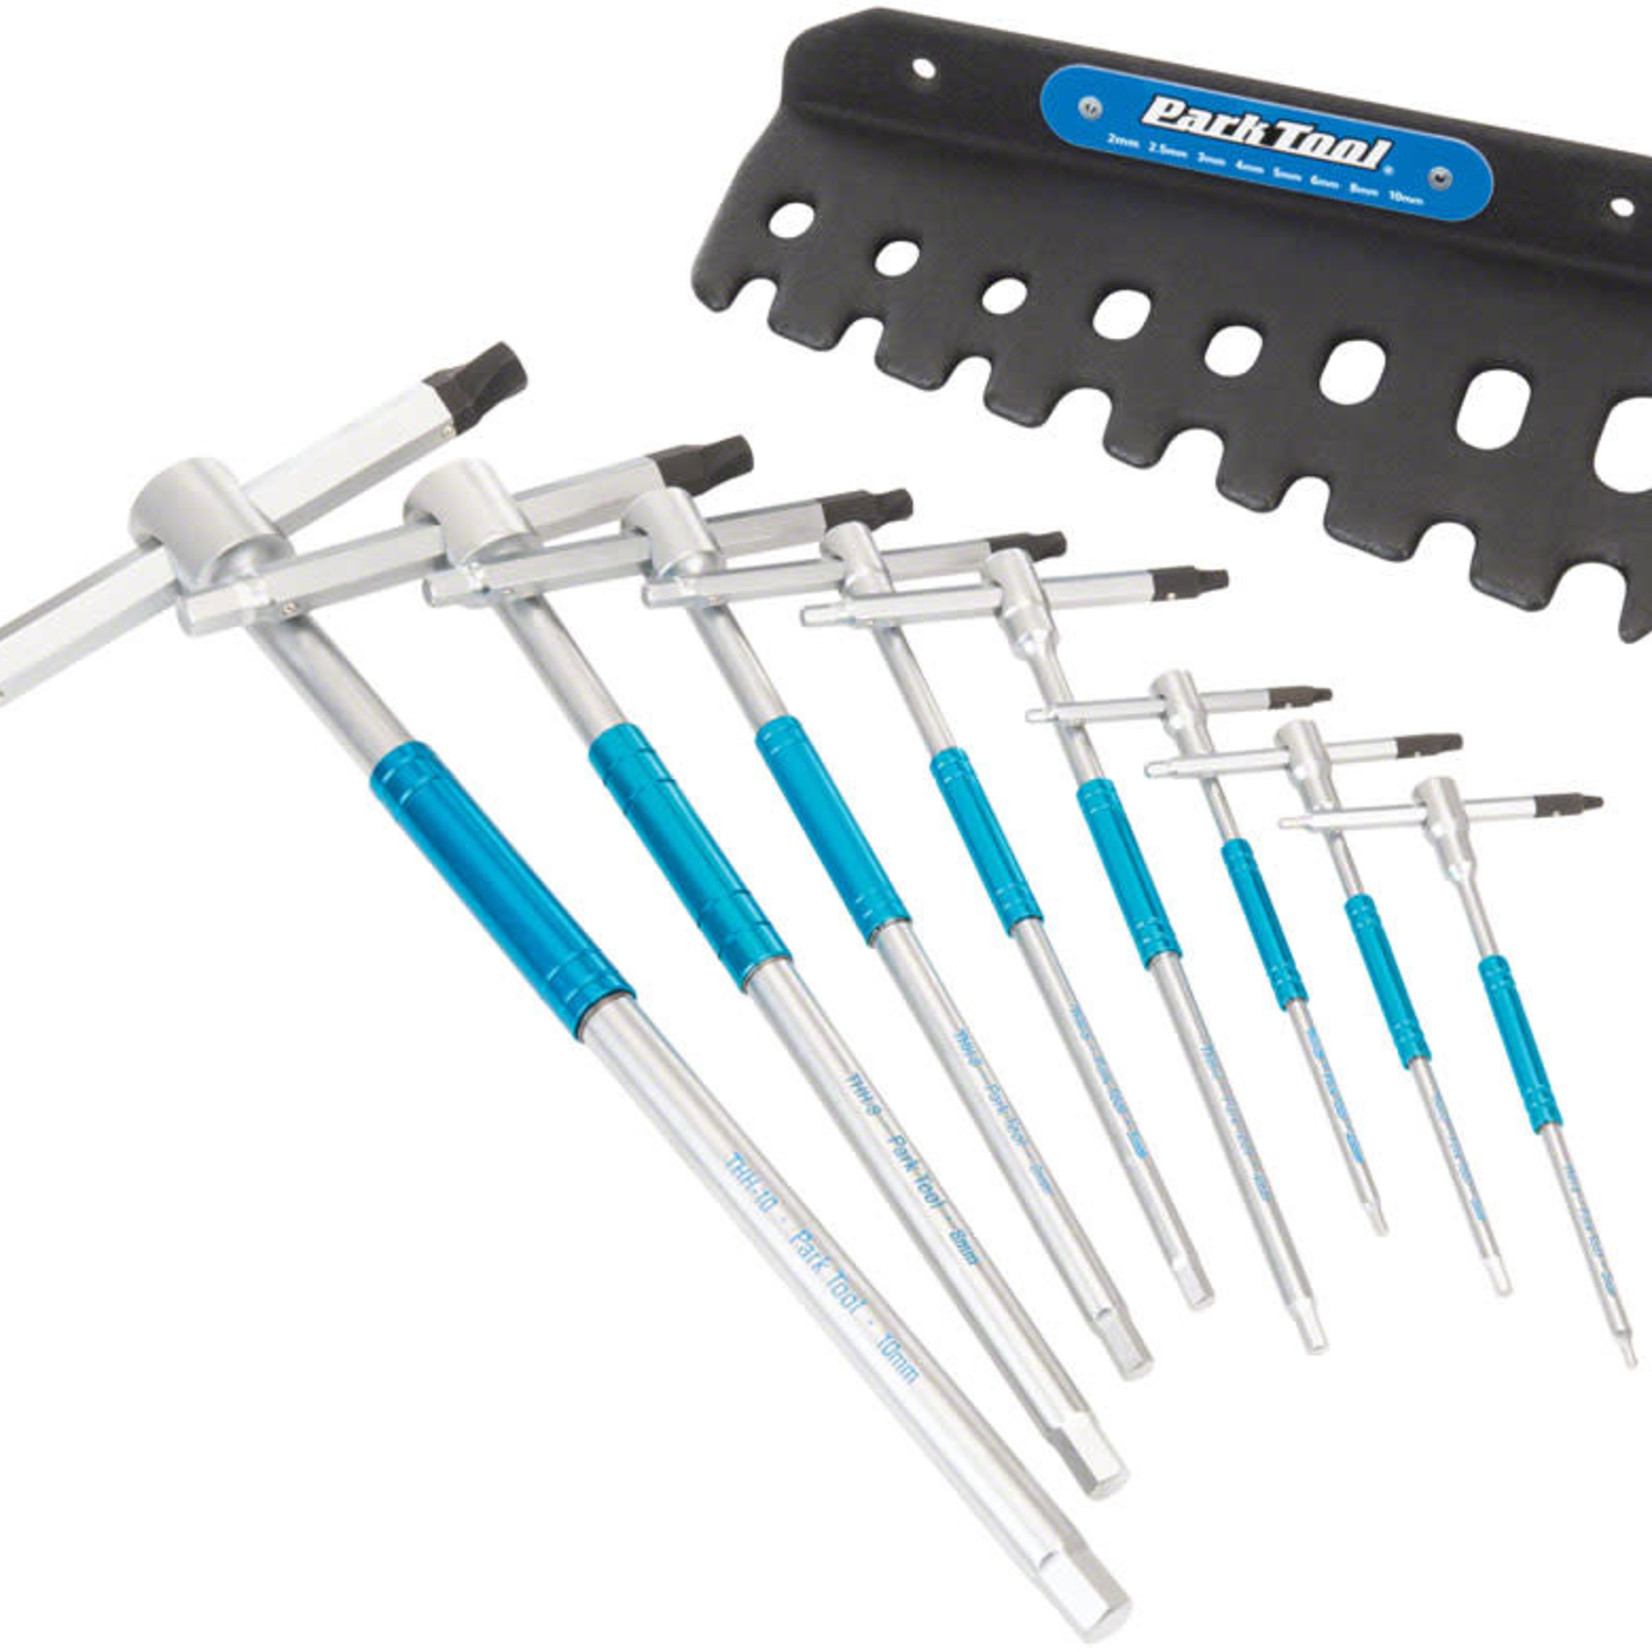 PARK TOOL Park Tool THH-1 Sliding T-Handle Hex Wrench Set